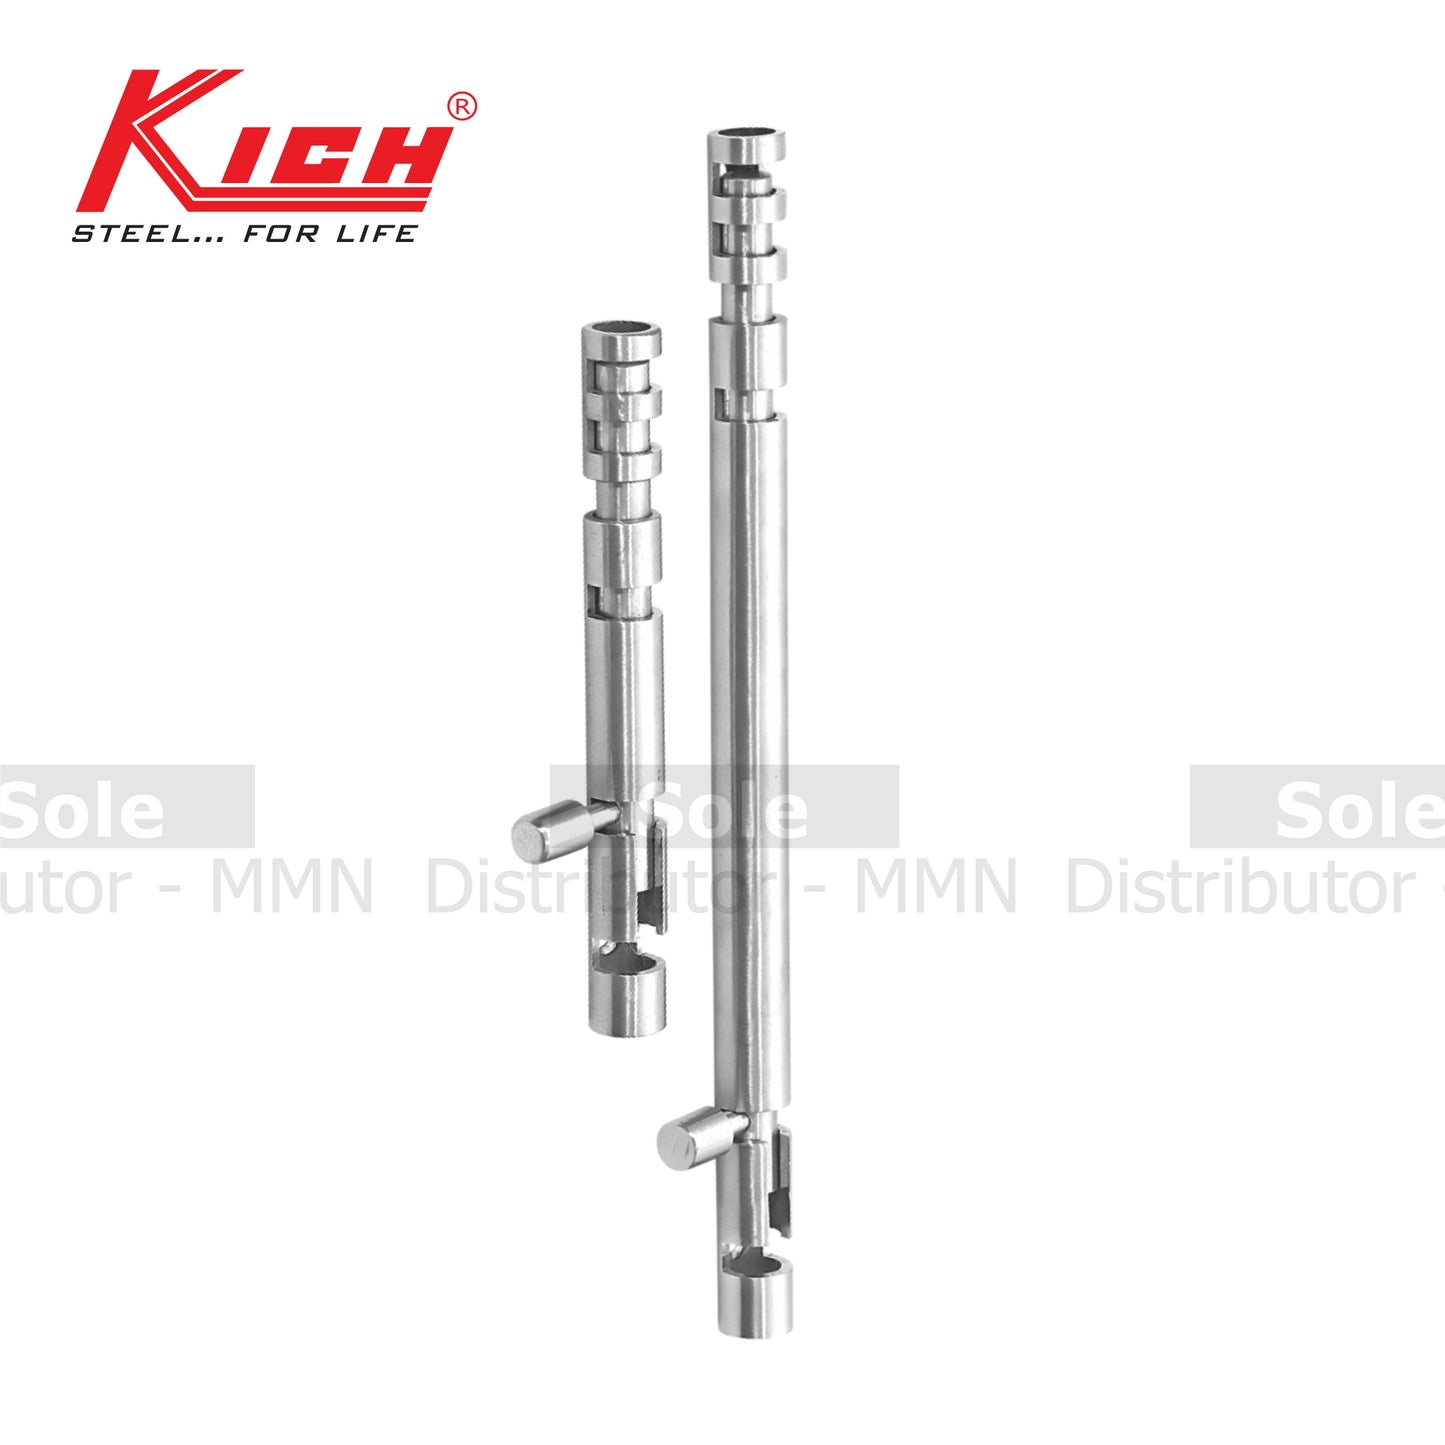 Kich Tower Bolt Round, Sizes 4 to 48 Inches, Stainless Steel 304 Grade - KTBR